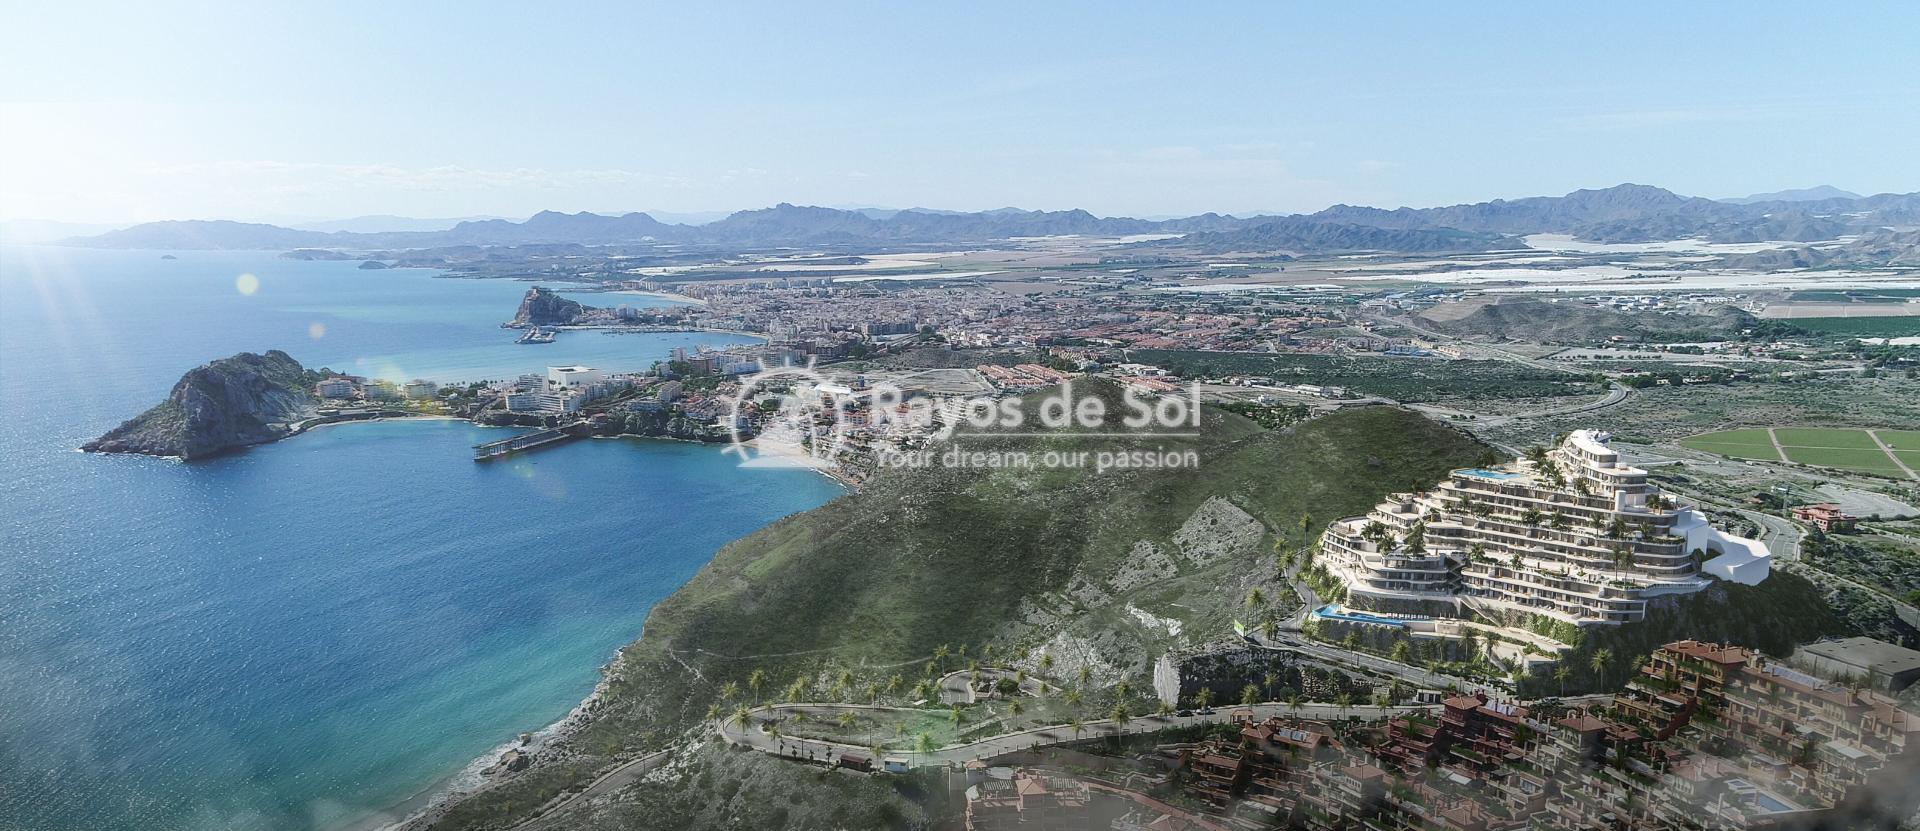 Beautiful ground floor apartment with seaviews  in Aguilas, Costa Cálida (AGQUIC2-2B) - 10